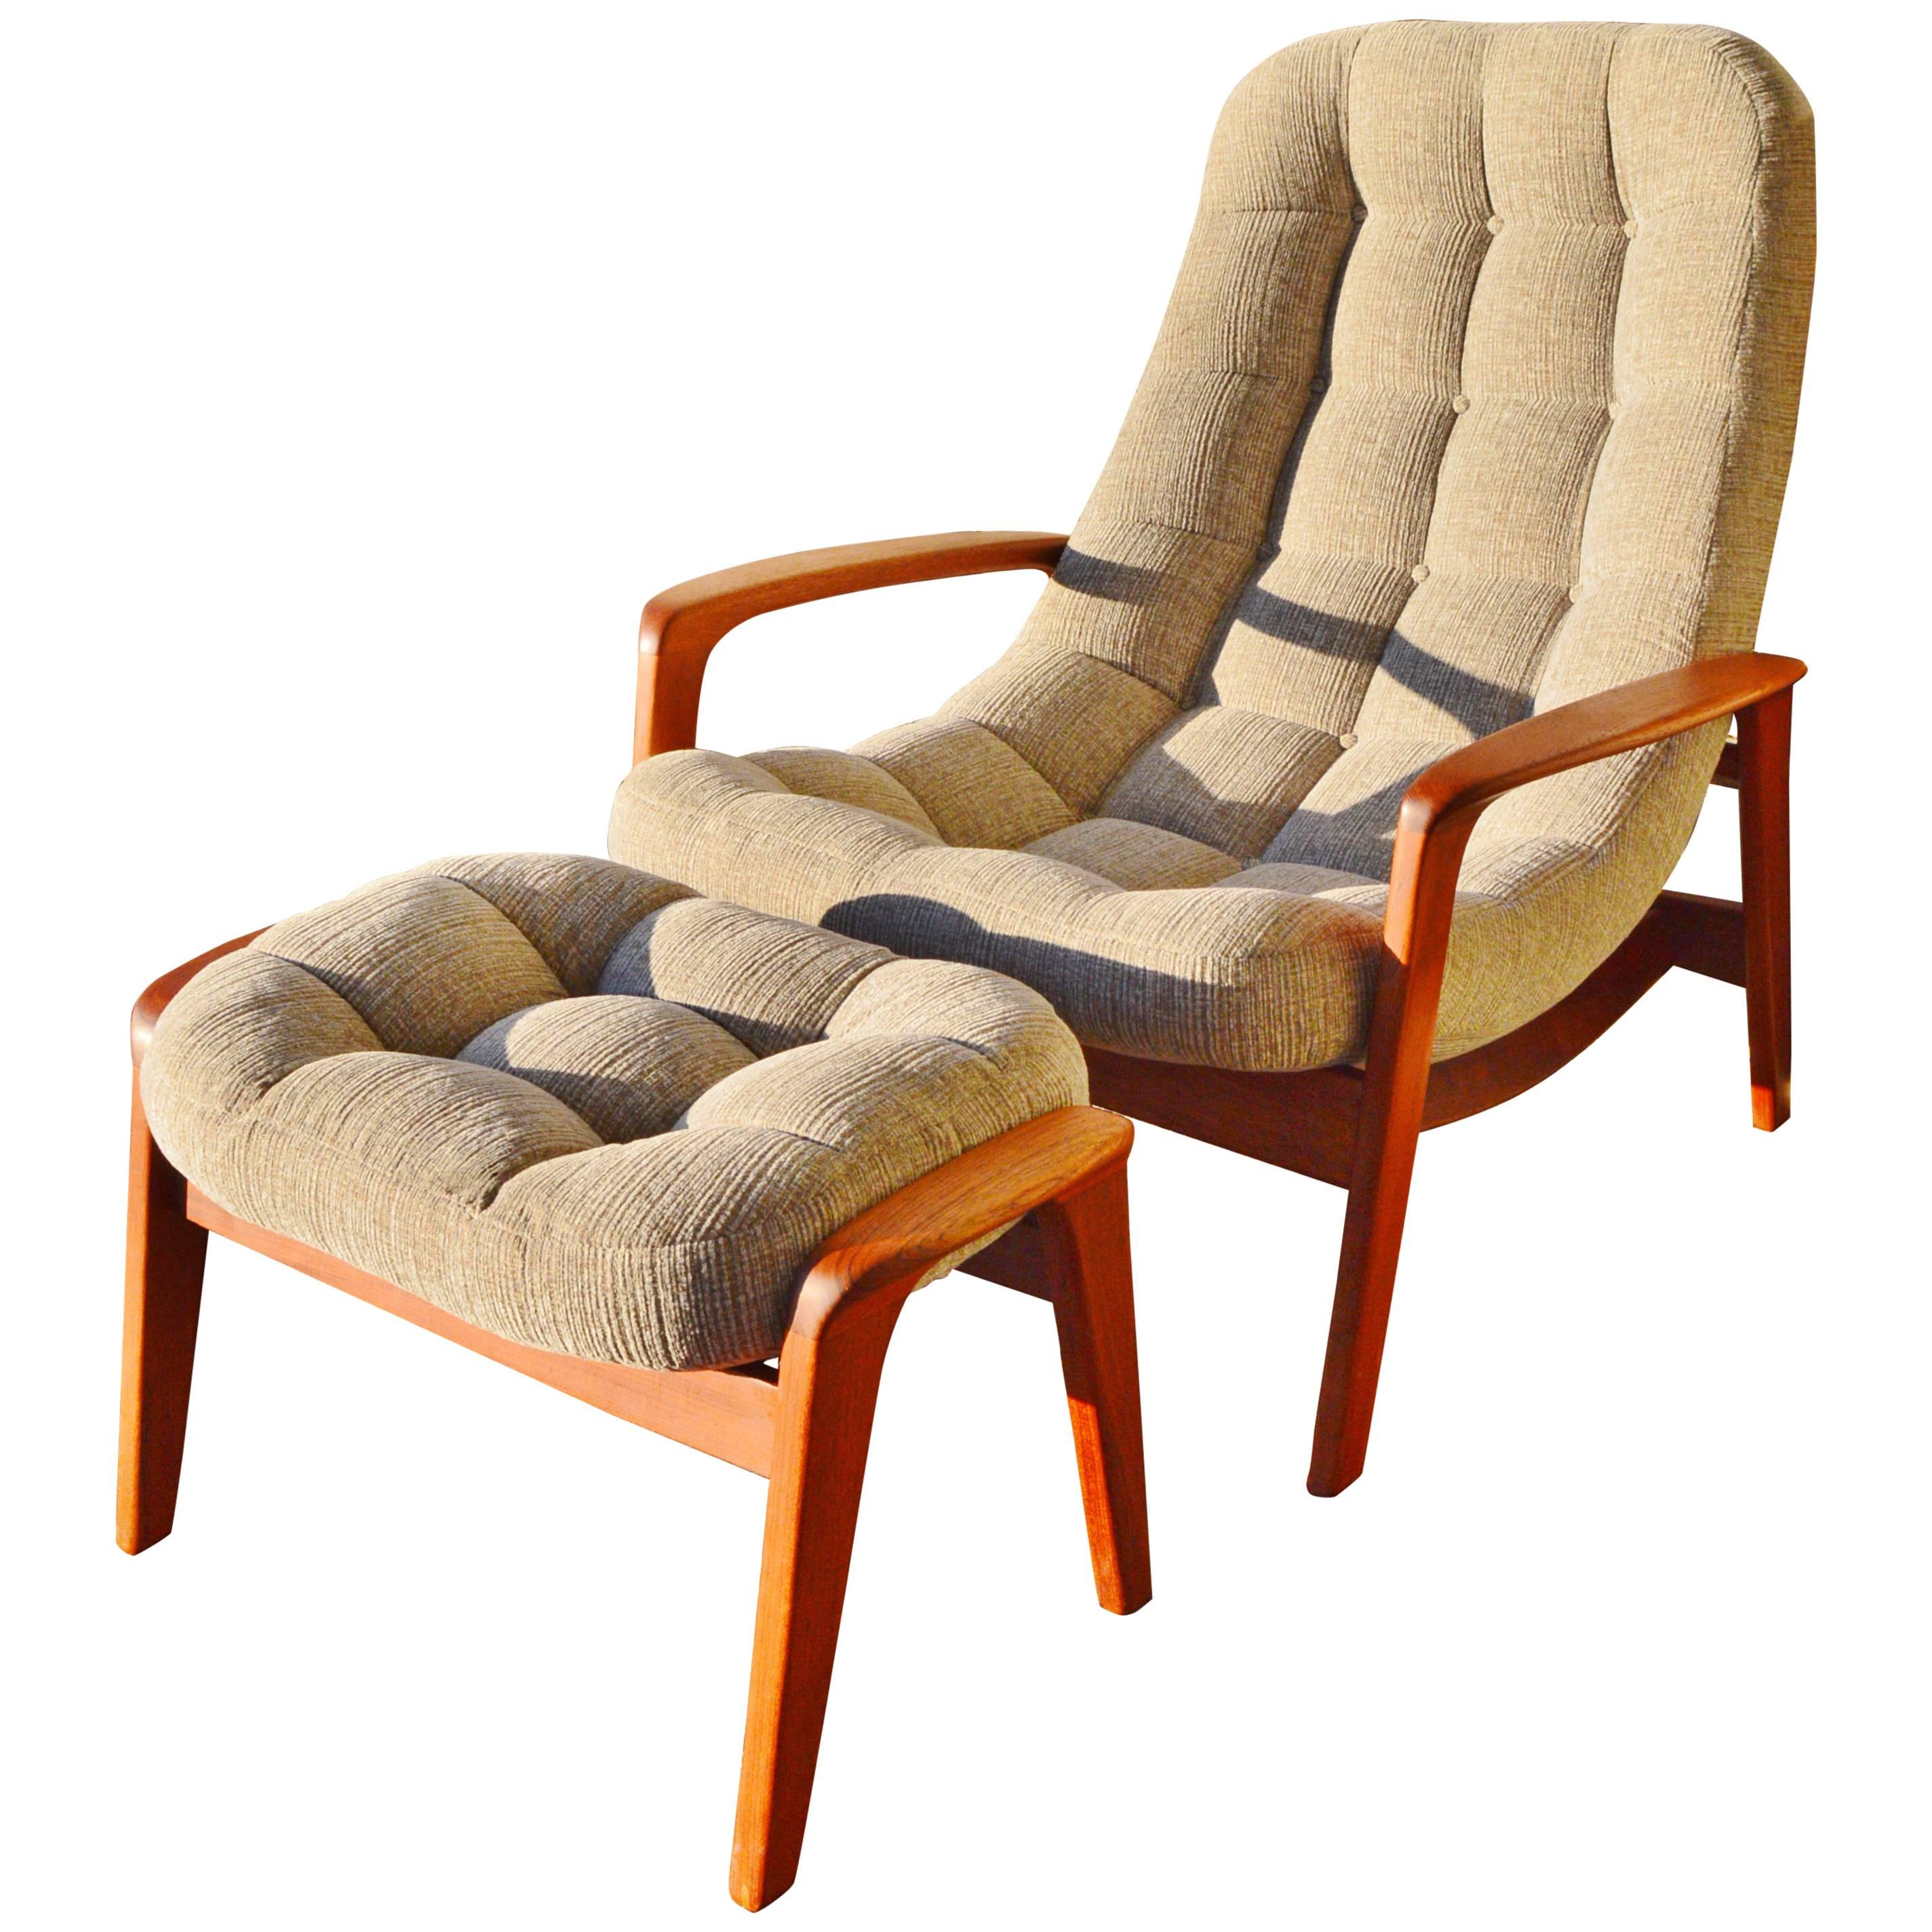 Button-Tufted Danish Style Teak Lounge Chair and Ottoman, Restored